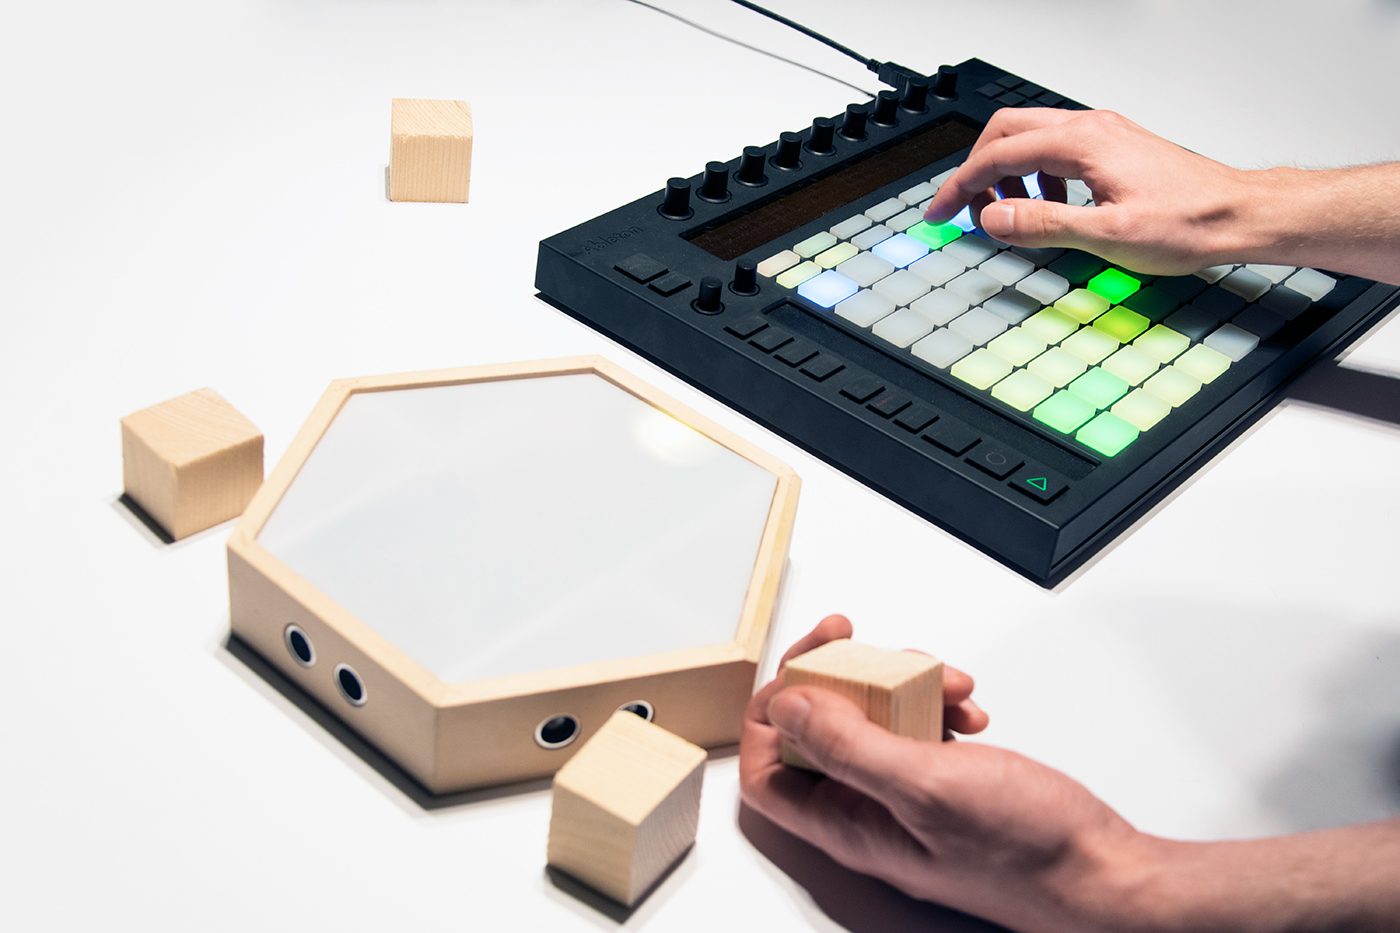 embodied interaction interactive sound physical computing Embodiment aesthetics of interaction inspire Creative learning Arduino student tangible Audio MIDI controller instrument